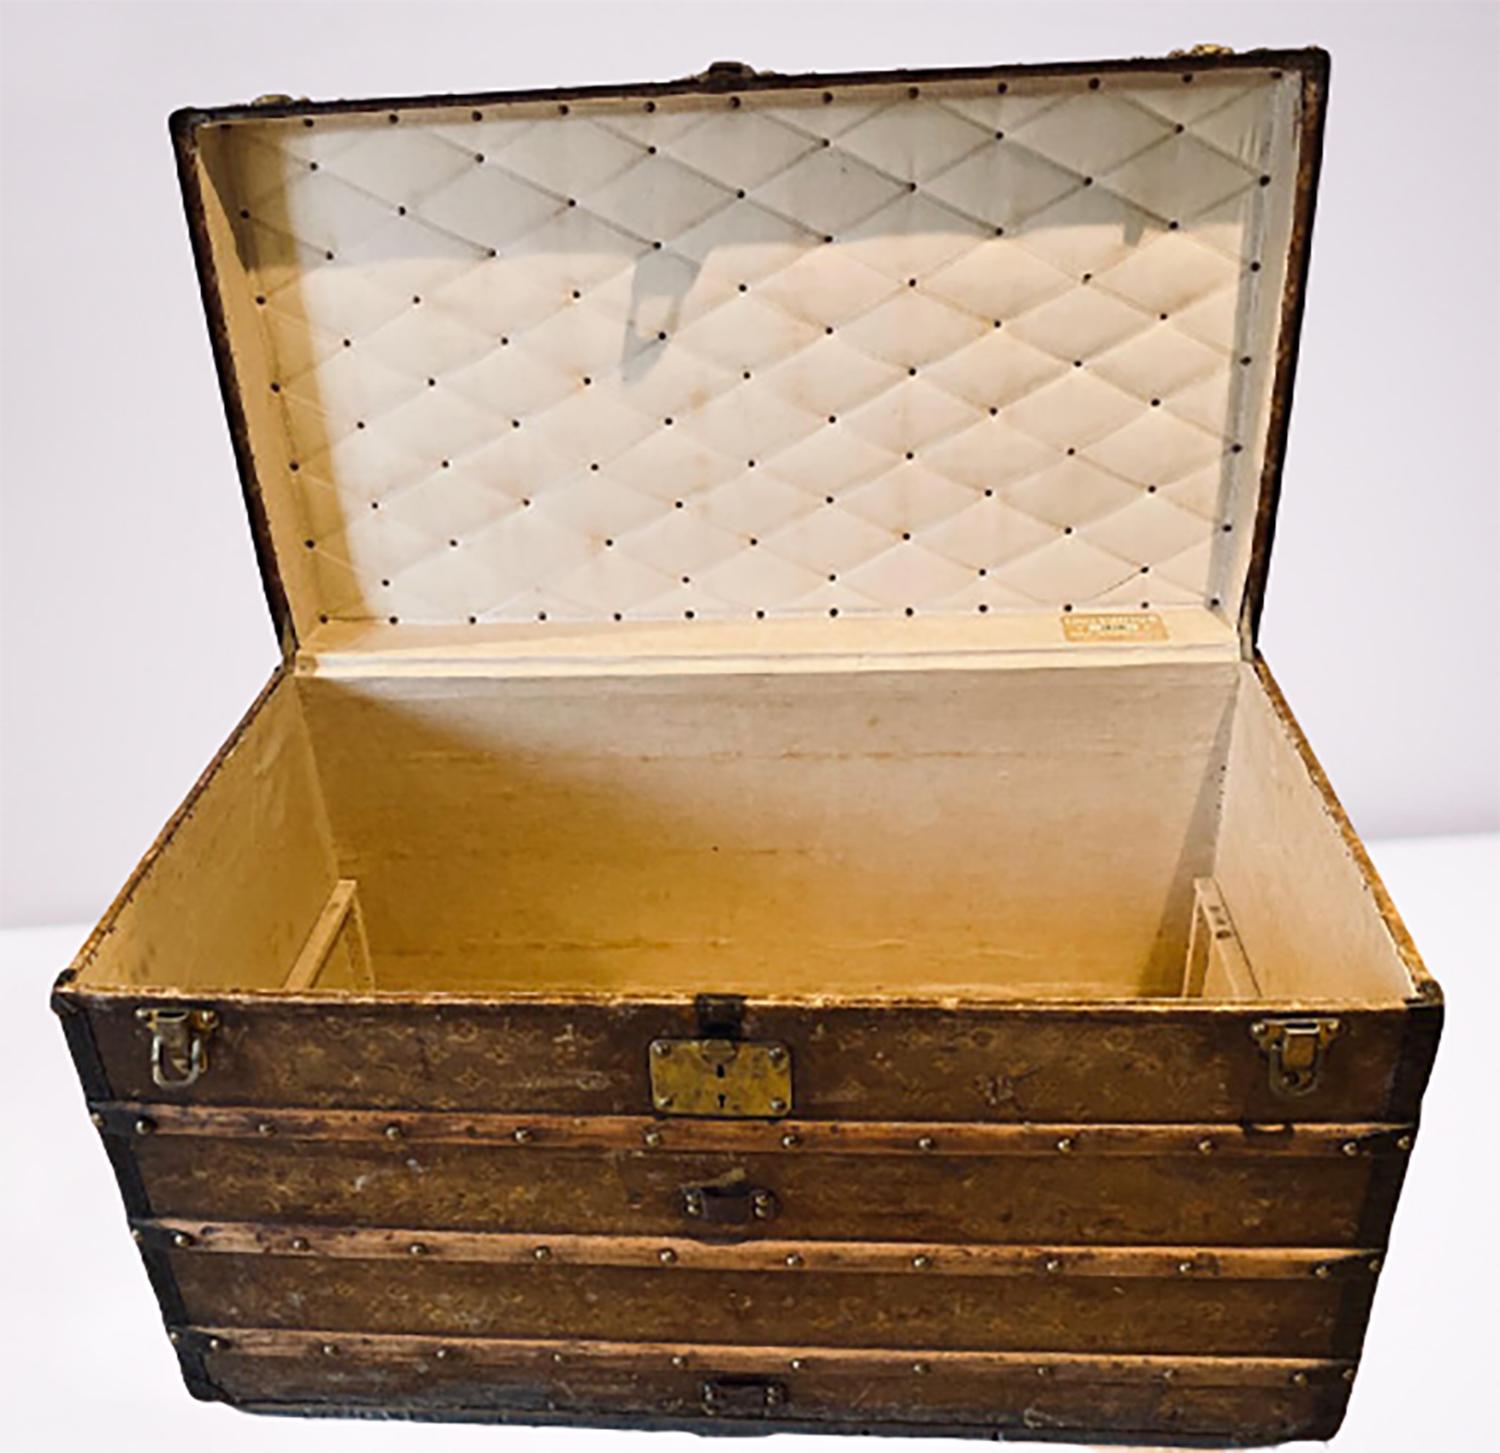 Louis Vuitton Monograph steamer trunk. This finely constructed steamer trunk is still strong and sturdy as it seems to have traveled the world. This 1905 early steamer has it original rollers on the base as well as all of the original hardware.
A